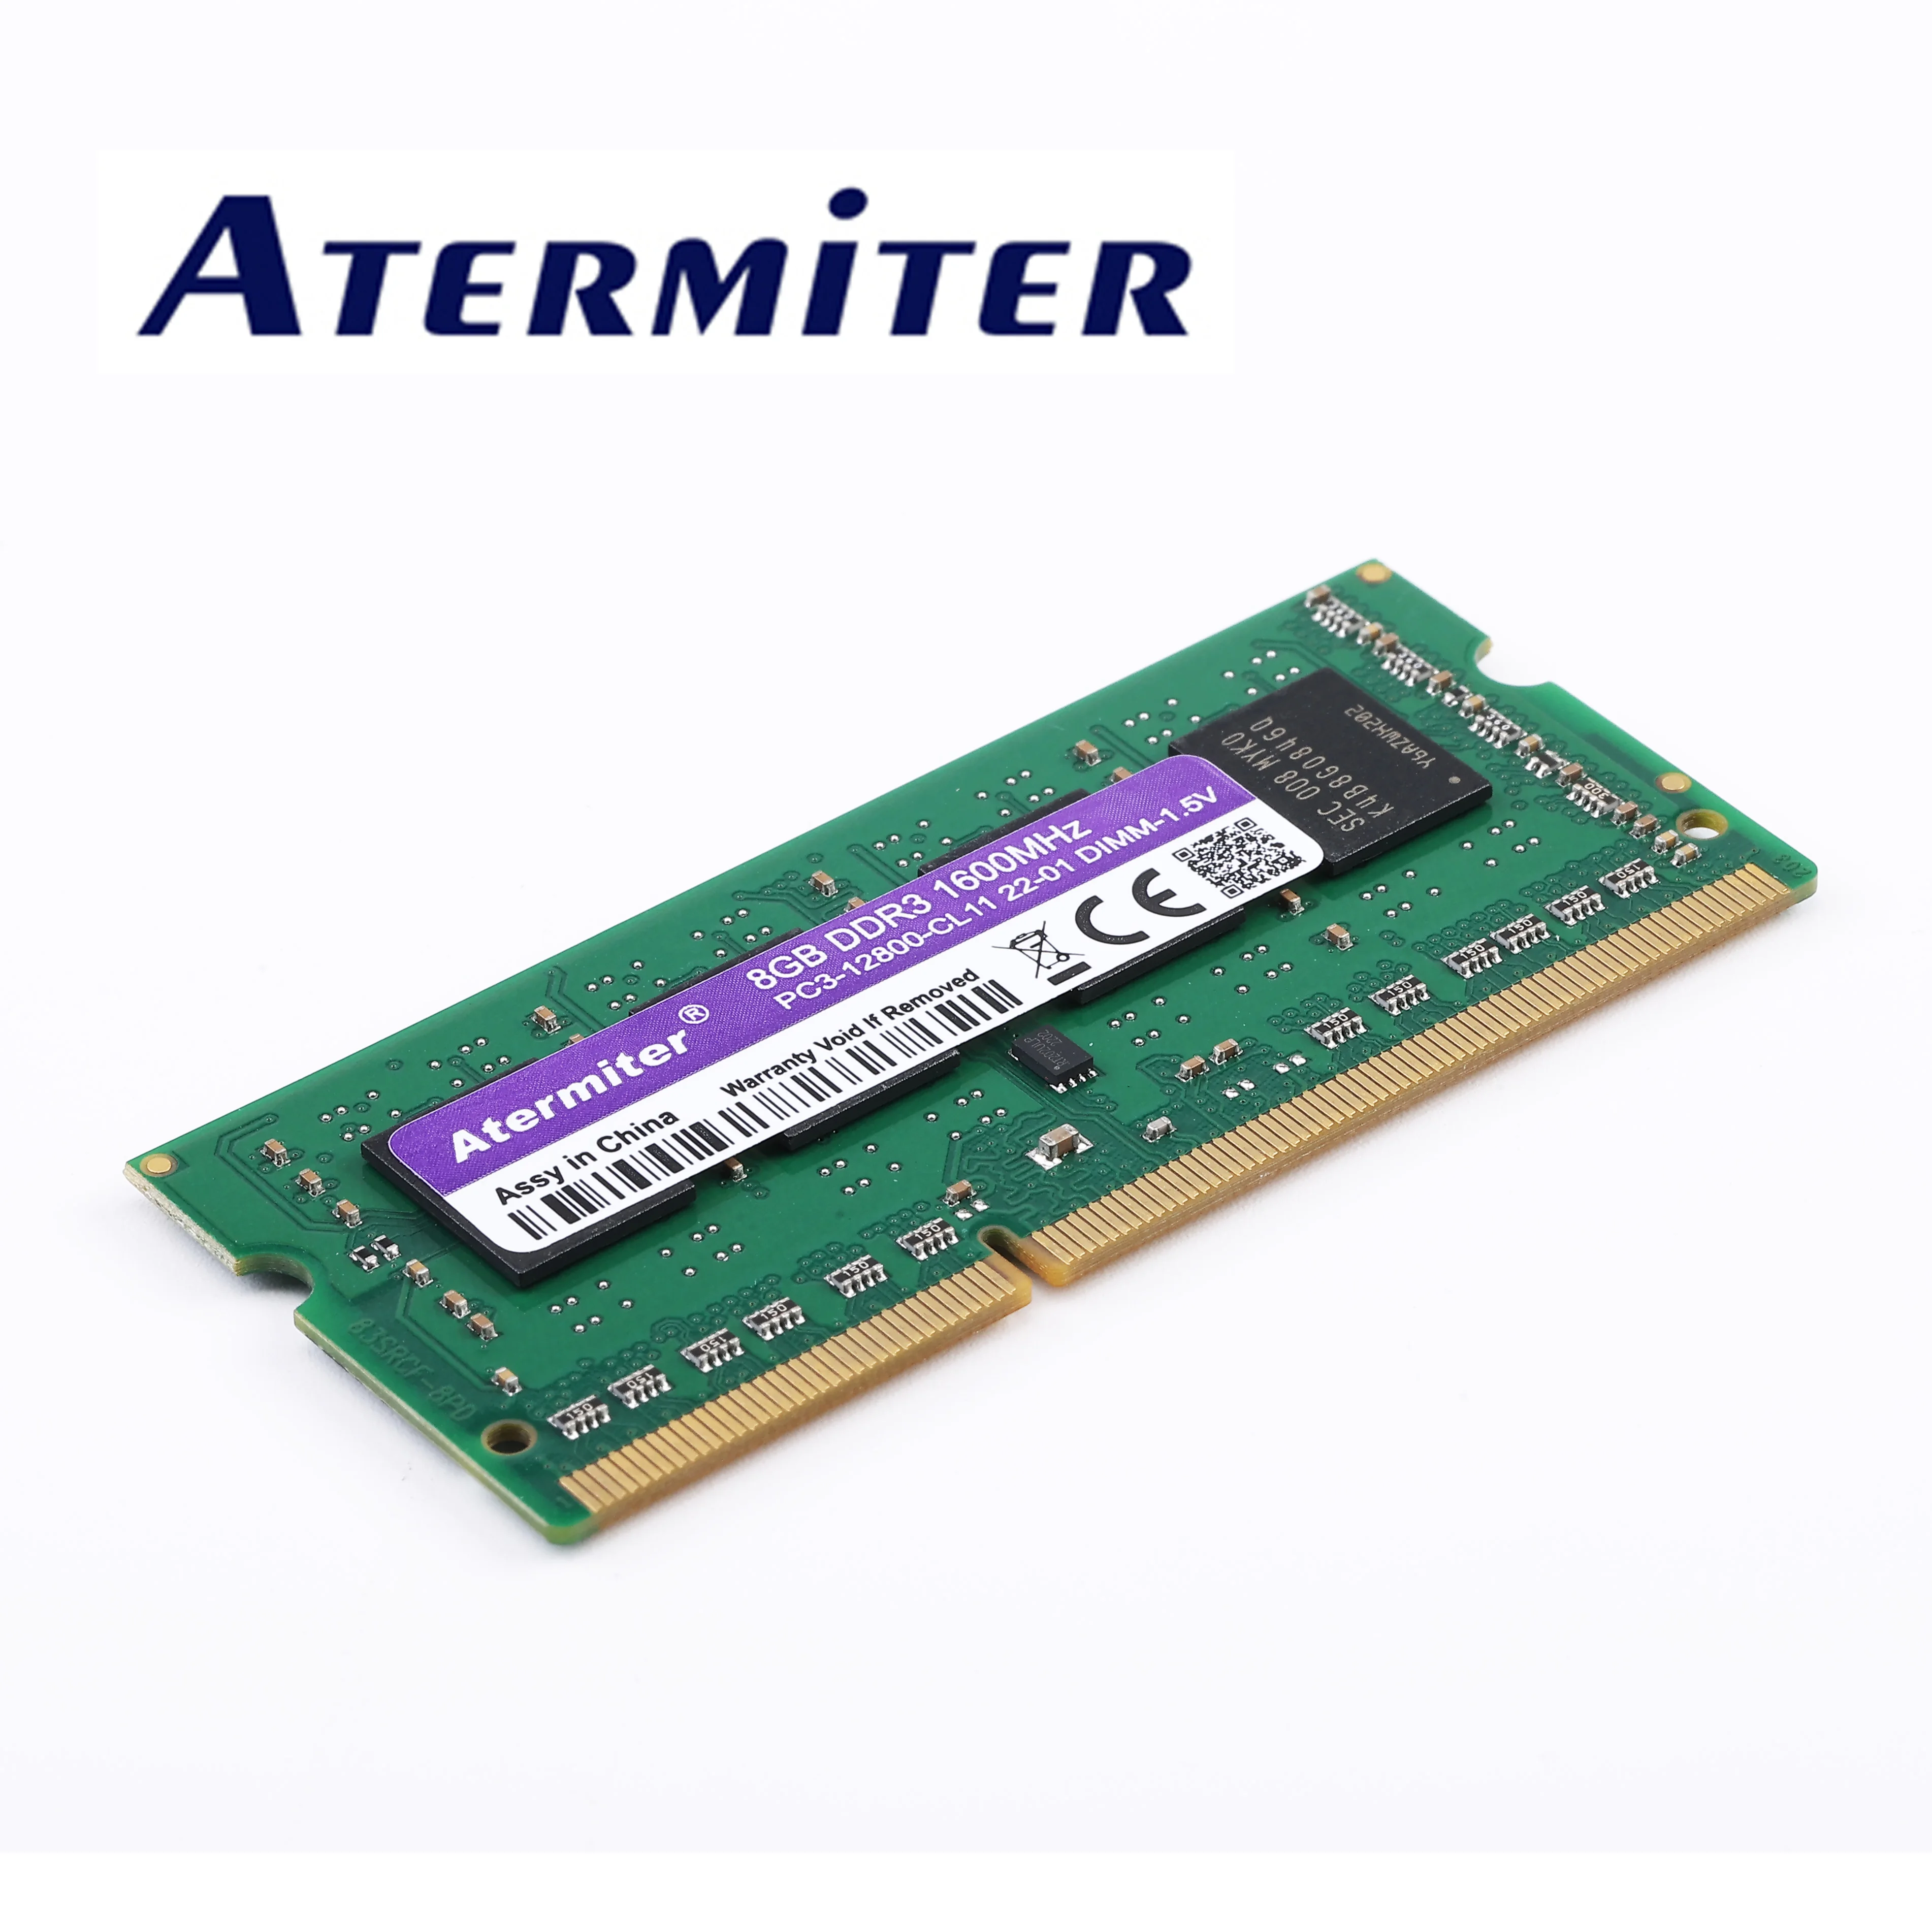 Atermiter Ddr4 Ram Memory Ddr4 Notebook 8gb 4gb 16g 2400mhz 2666mhz 2133mhz  1.2v So-dimm Ddr4 For Laptop - Rams - AliExpress